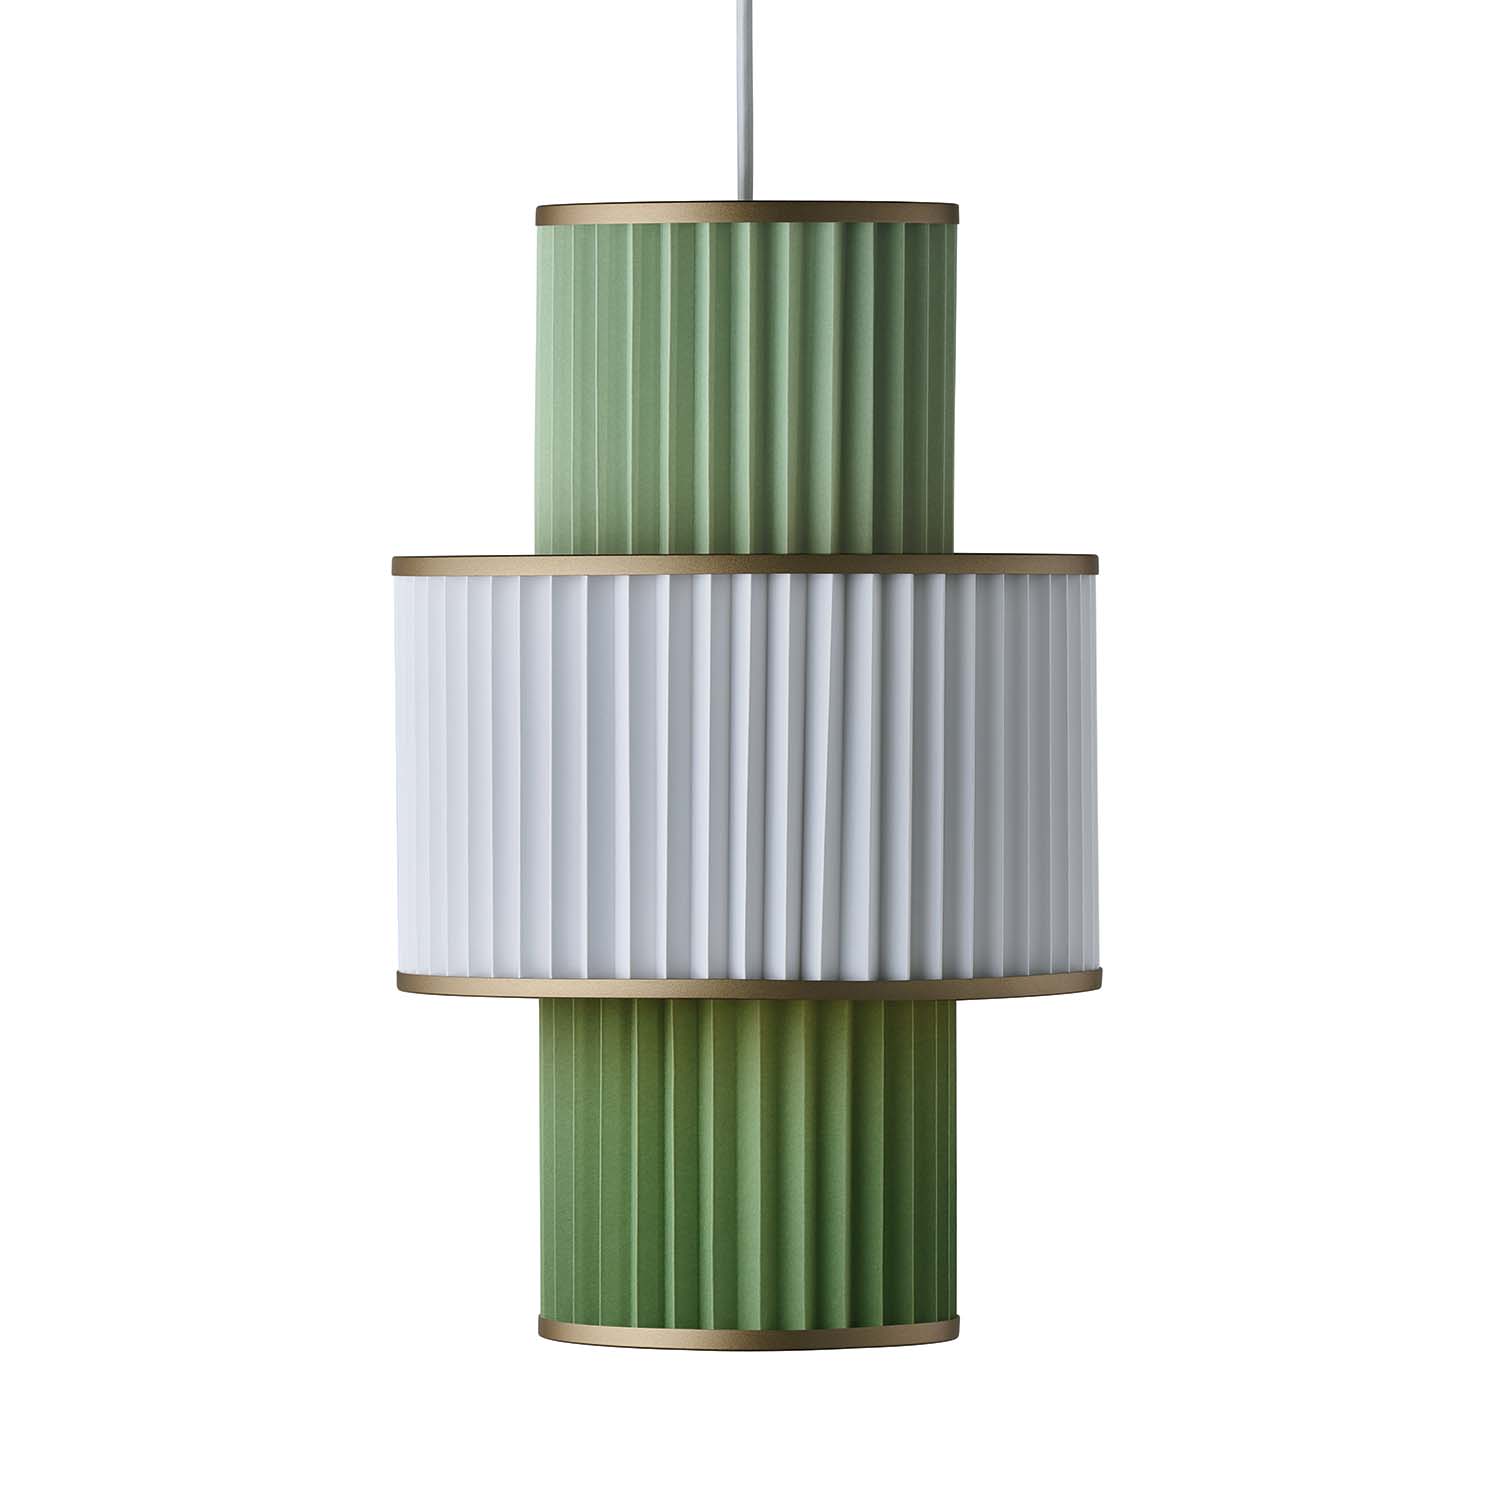 PLIVELLO 111 - Chic handmade pleated paper hanging lamp